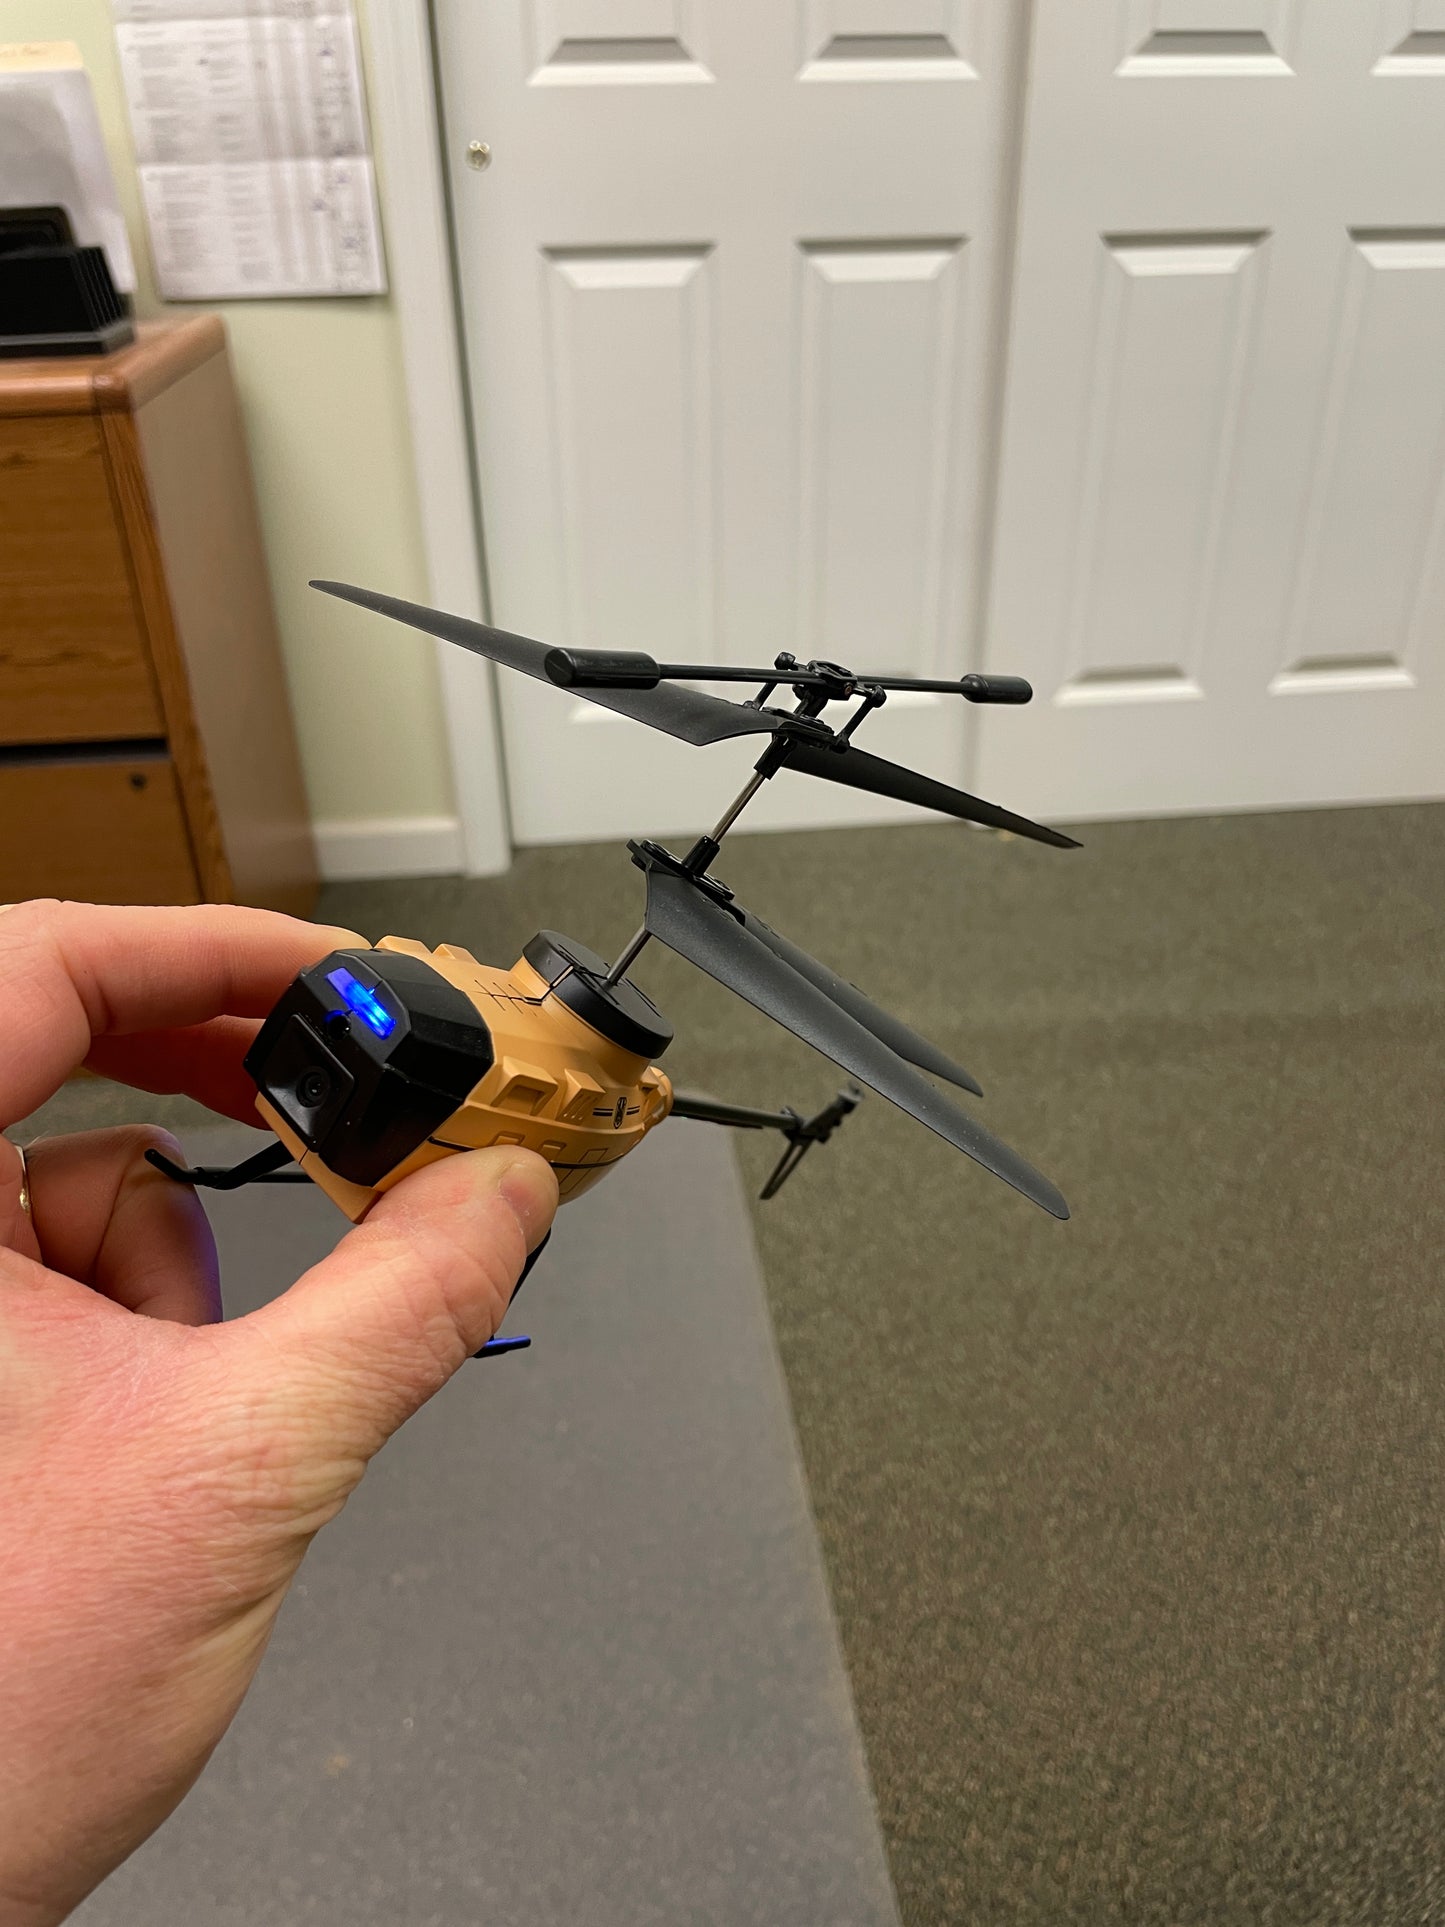 Fun and Affordable Helicopter - nearly indestructible - 0, 1 or 2 cameras - several options - Wifi live feed with Remote Control